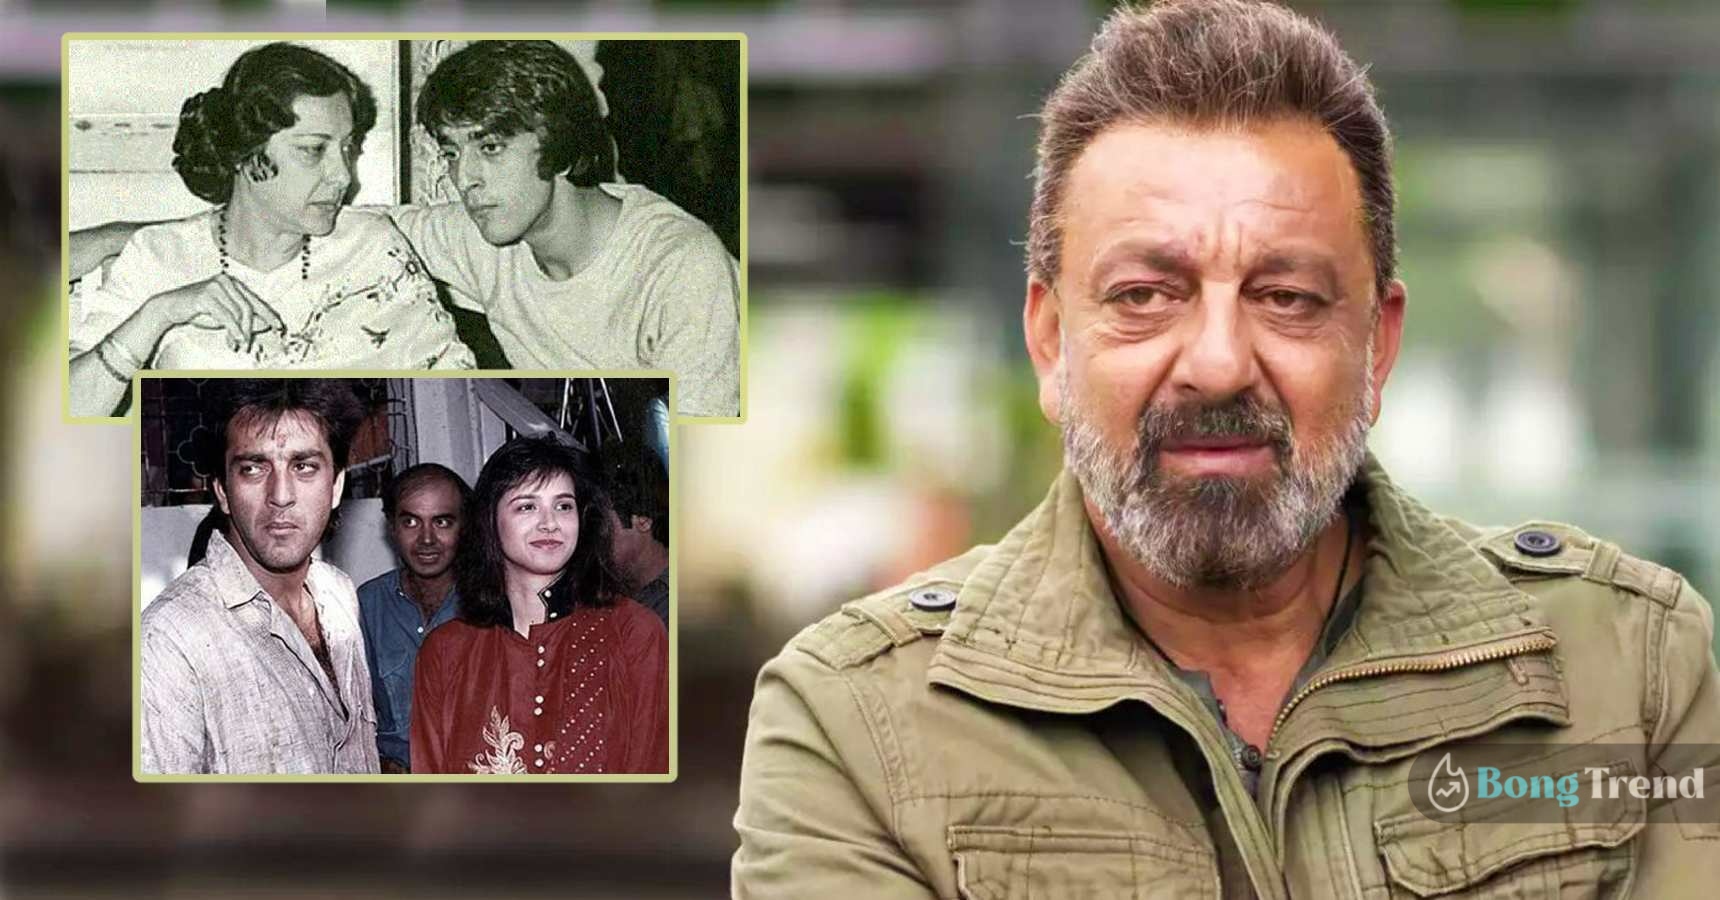 Sanjay Dutta open up about his cancer journey